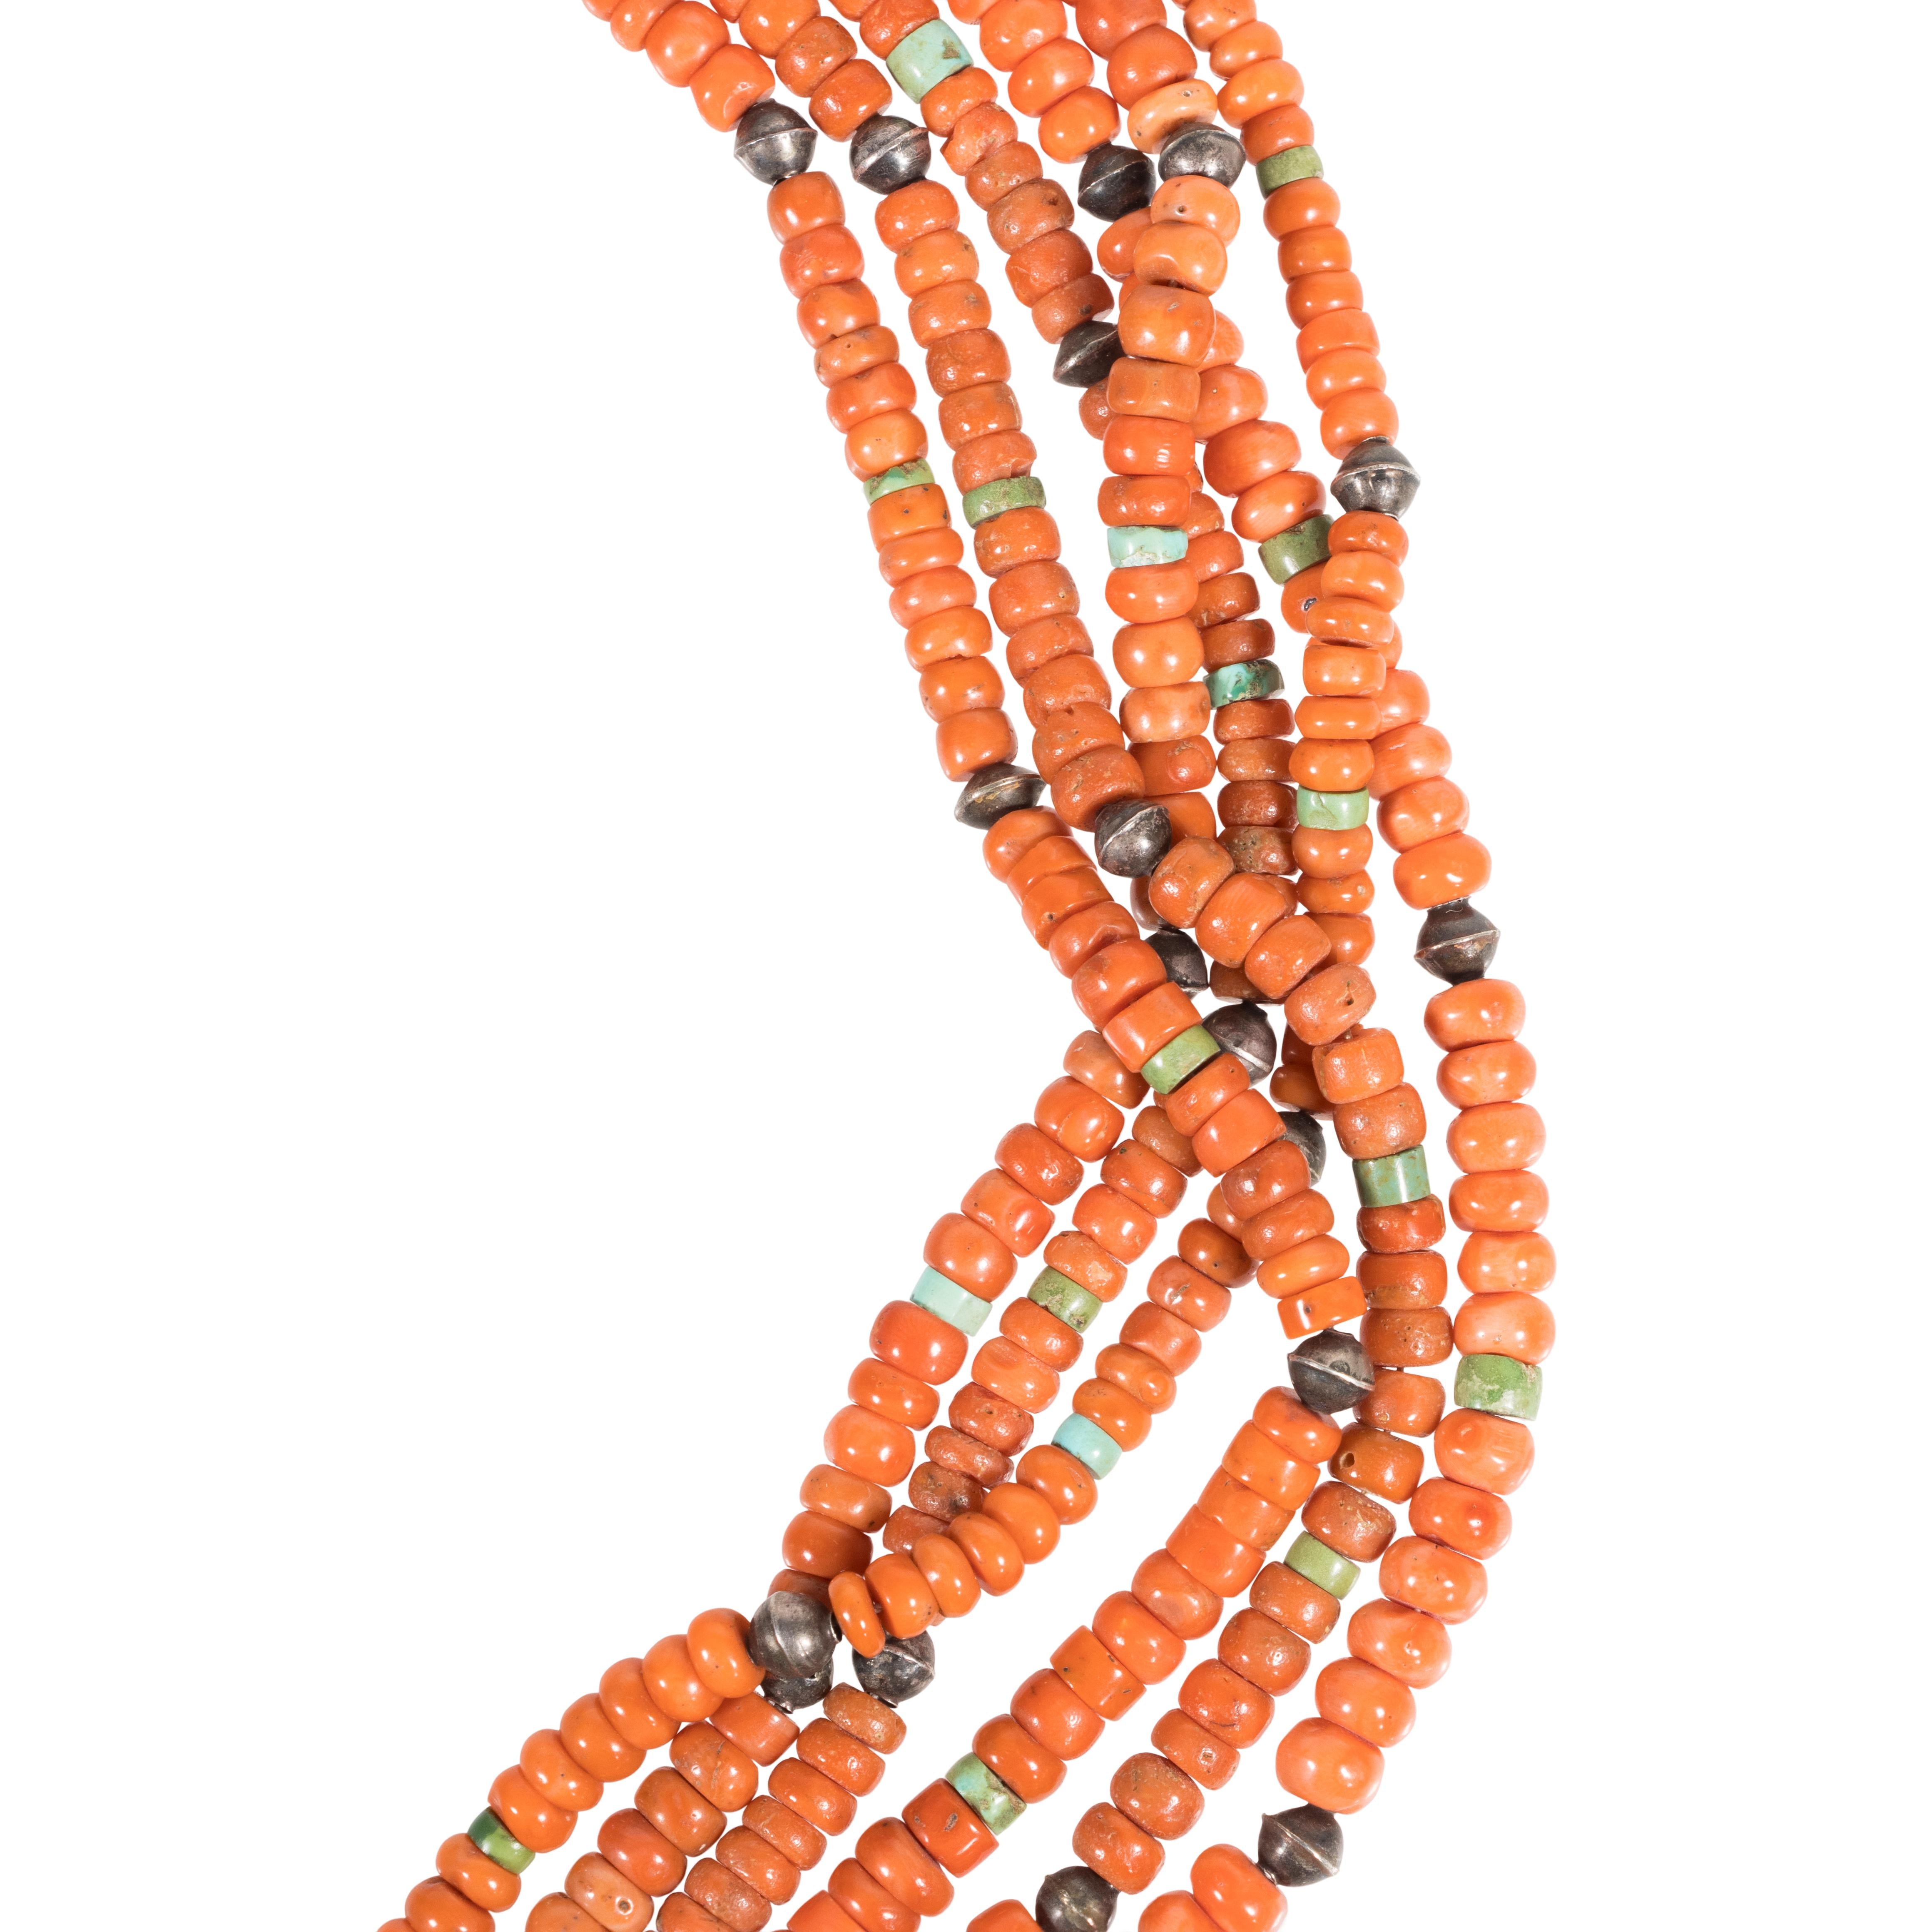 Zuni six strand coral necklace with traditional cord wrapping and strung with graduated coral beads, accented with turquoise and silver beads. Unmarked.

PERIOD: Mid 20th Century

ORIGIN: Southwest - Zuni, Native American

SIZE: 28